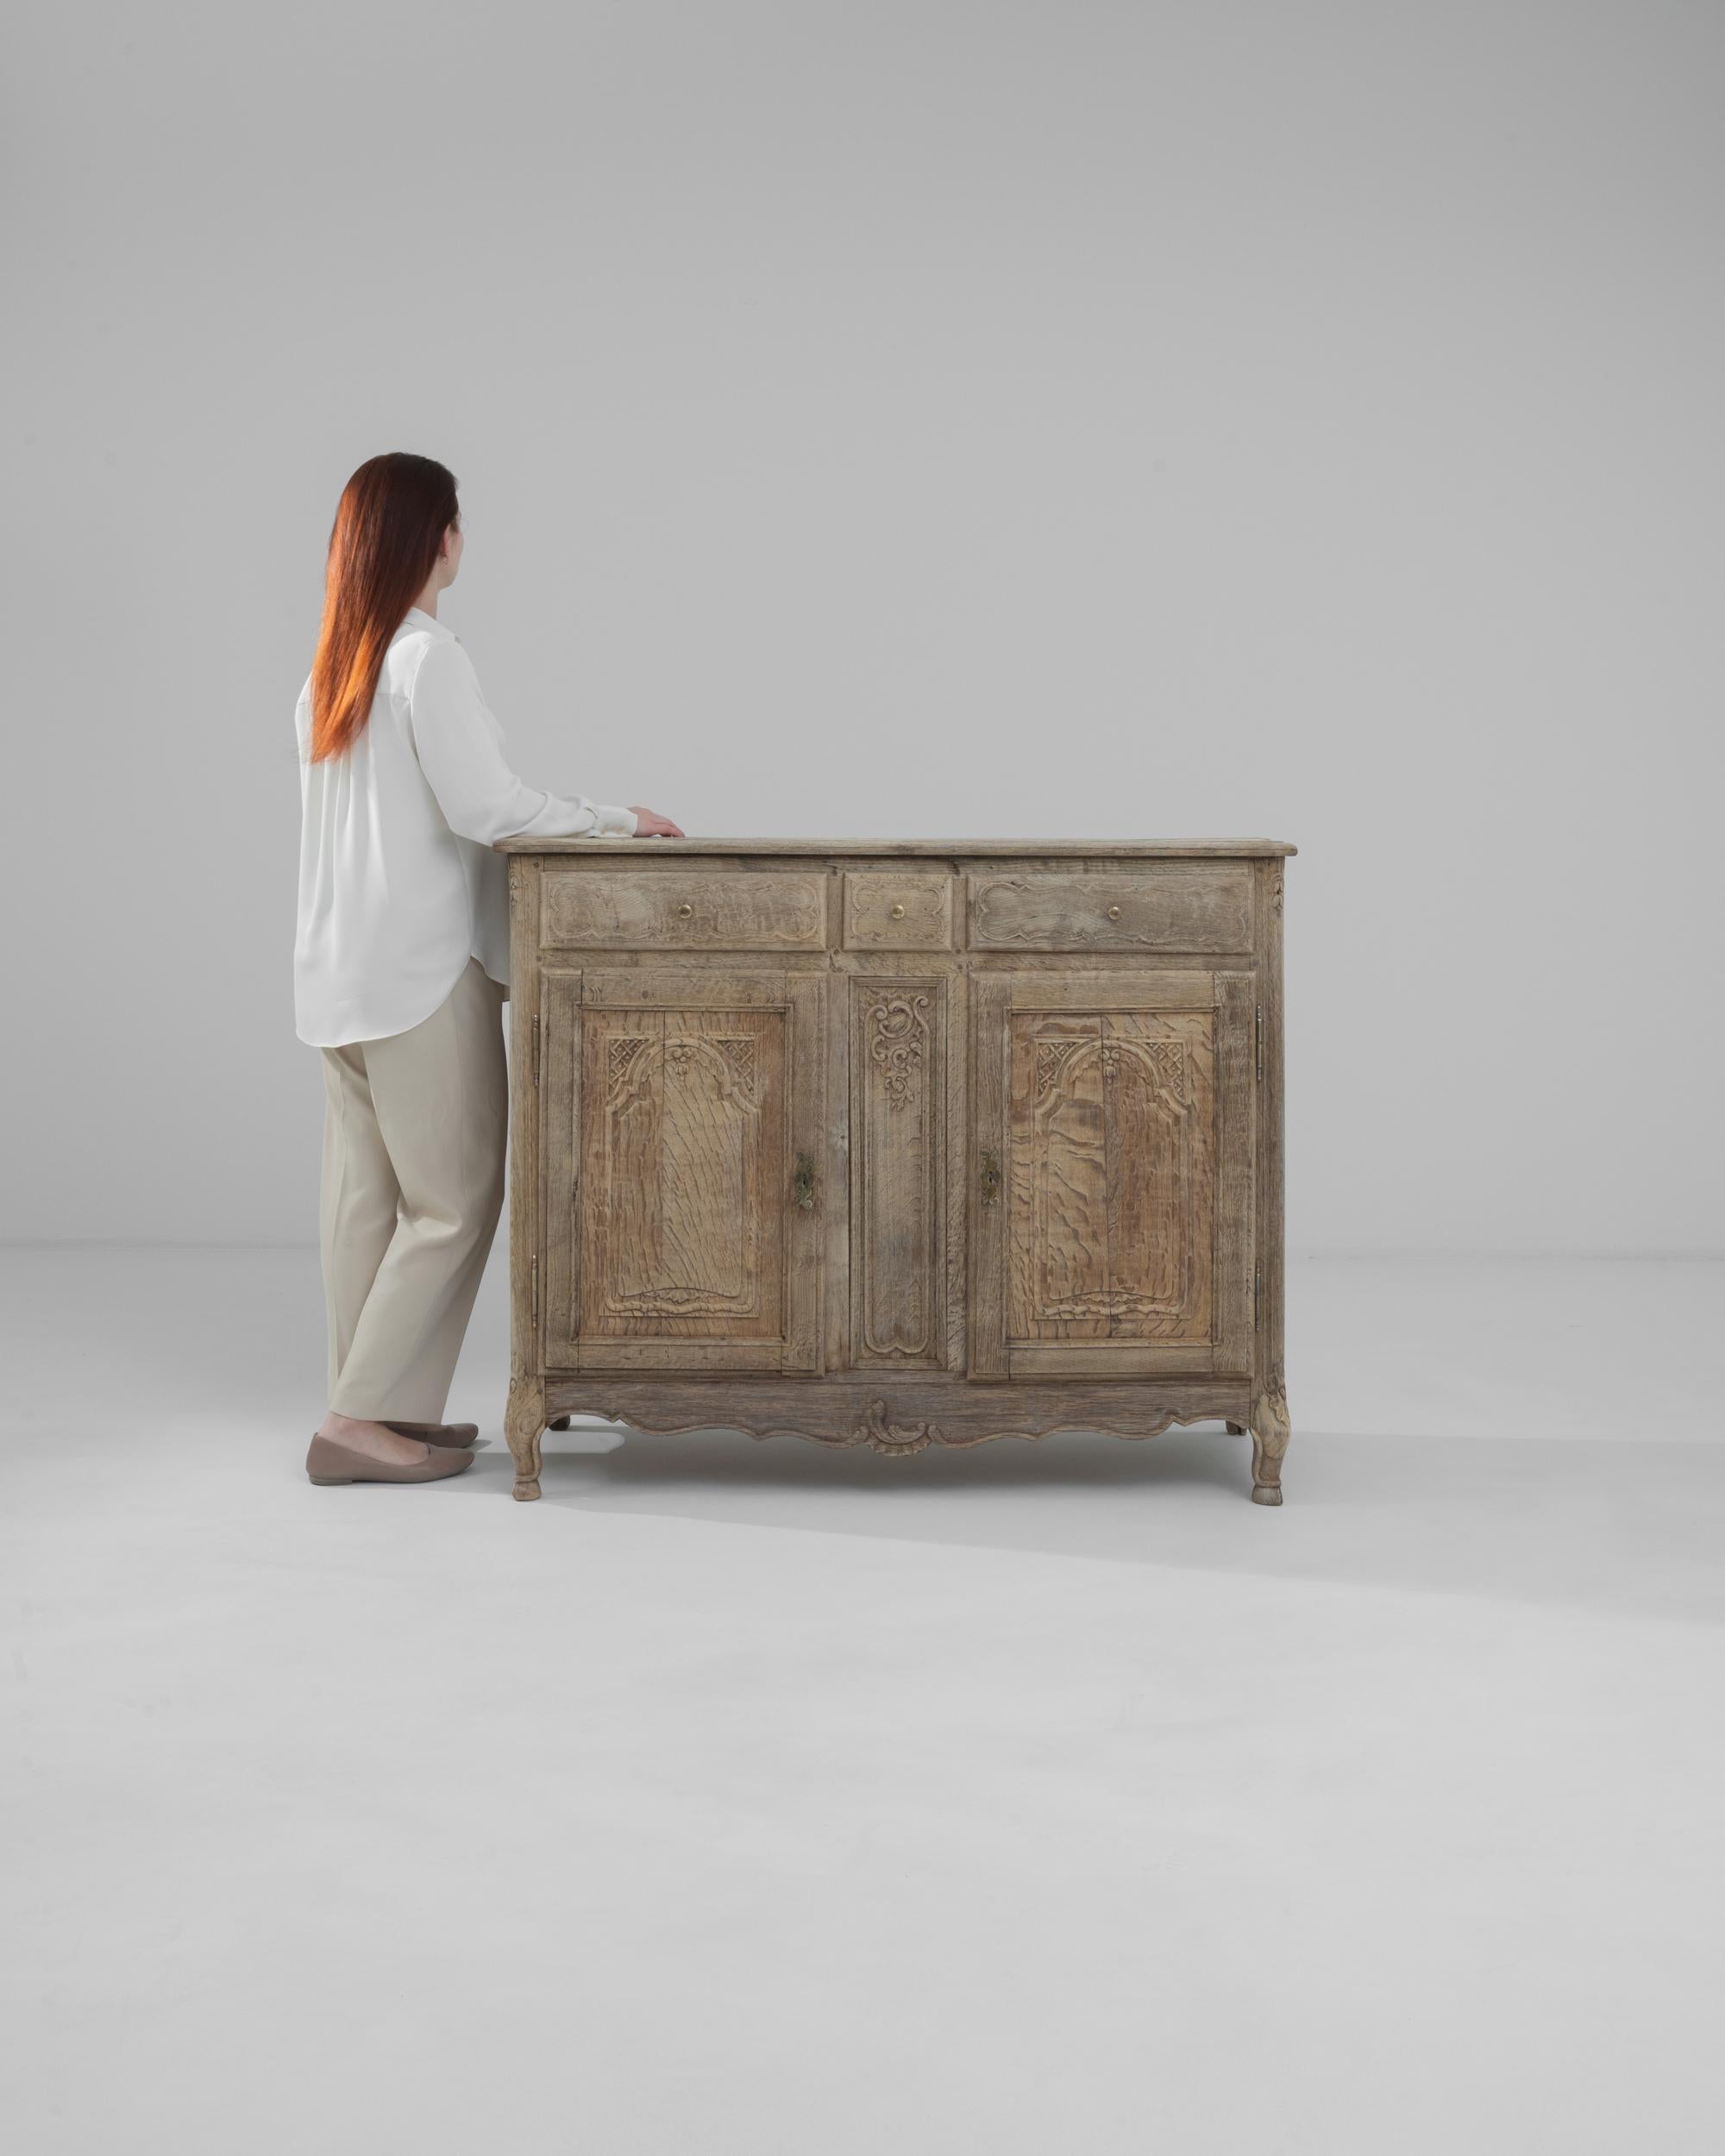 This 19th Century French Bleached Oak Buffet exudes a stately presence, with its robust and time-worn facade evoking tales of grandeur from a bygone era. The bleached oak finish highlights the natural wood grain and intricate carved details, giving